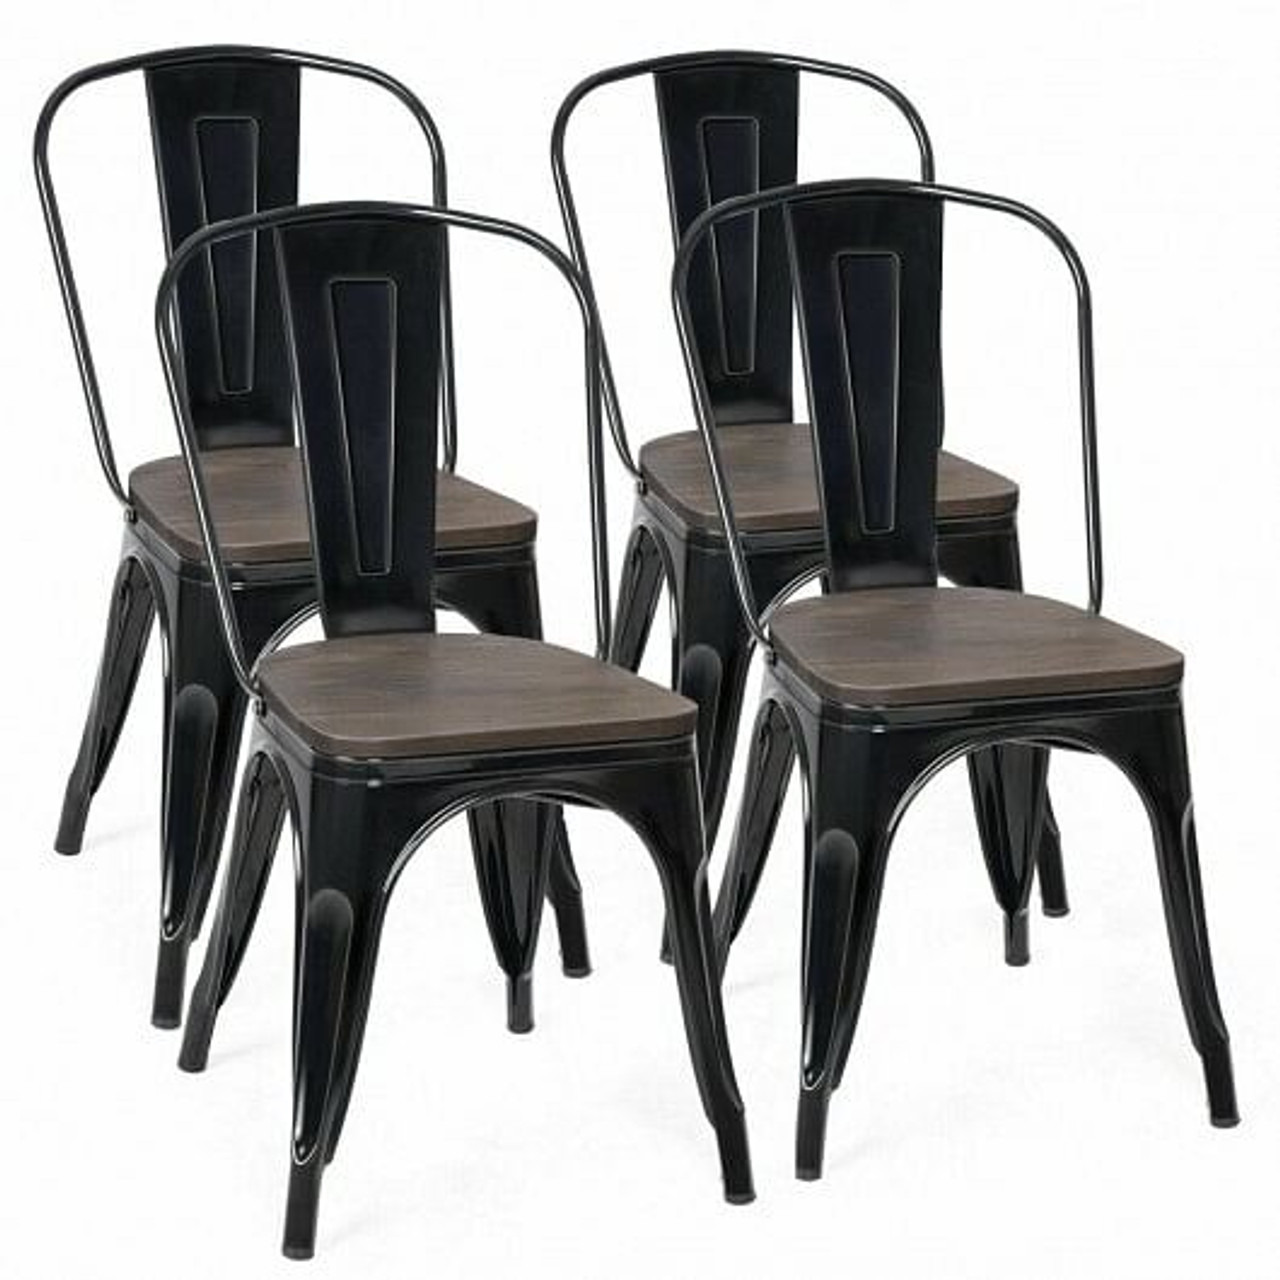 18 Inch Height Set of 4 Stackable Style Metal Wood Dining Chair-Black